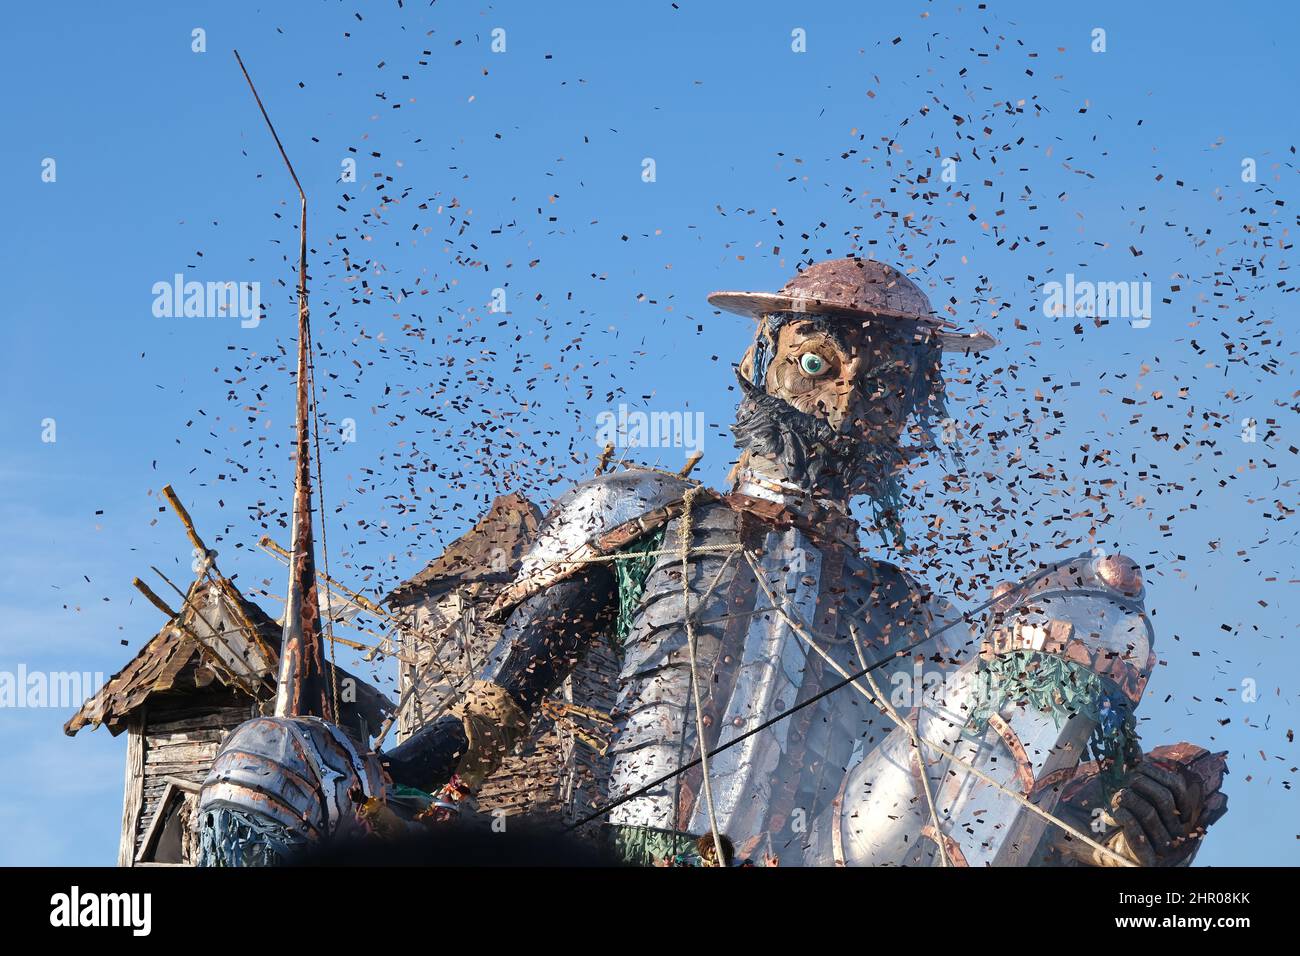 Photos of the parade floats for the carnival of viareggio, in the north of tuscany, in Italy. Stock Photo